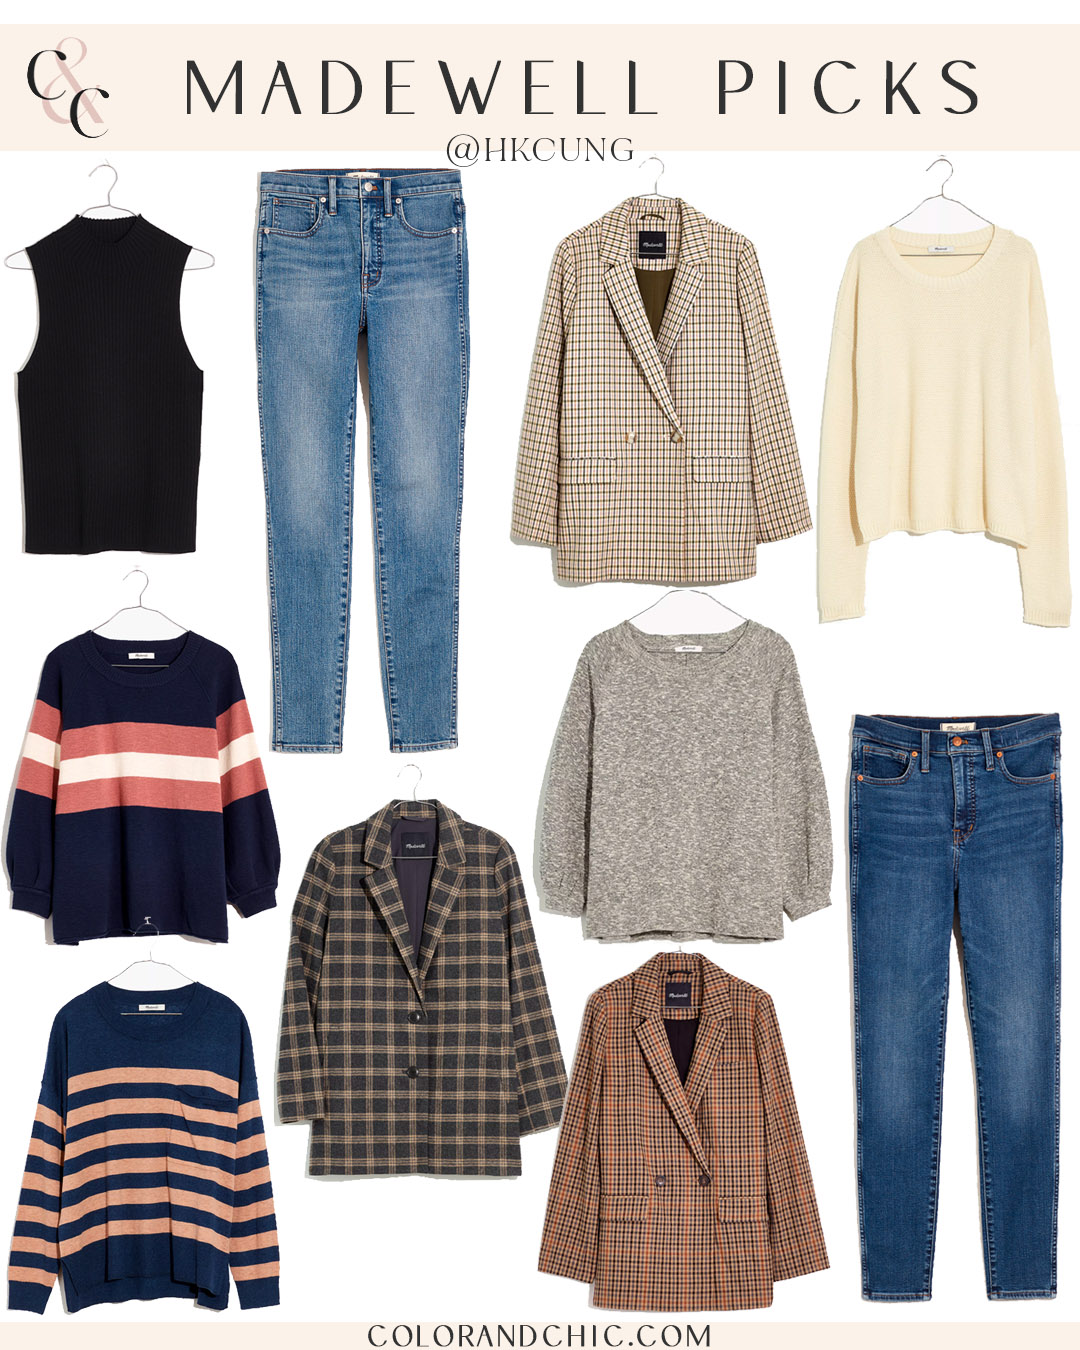 New Fall Fashion Must-Haves You'll Love From Madewell - Color & Chic